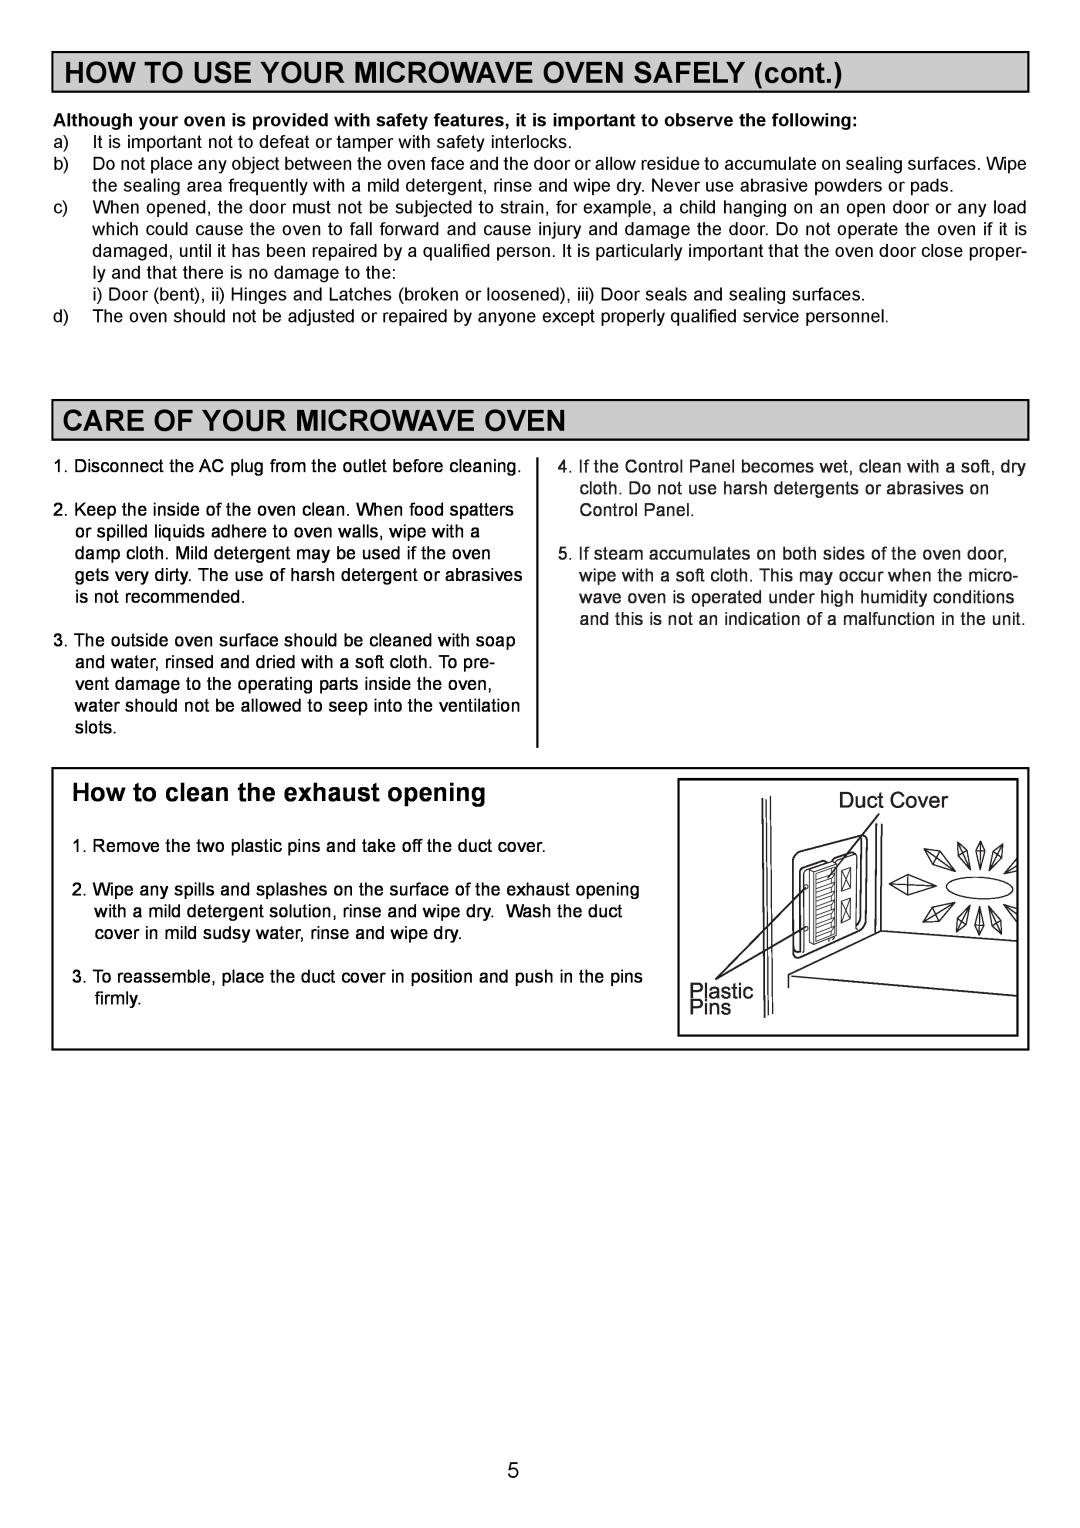 Sanyo EM-S1000 HOW TO USE YOUR MICROWAVE OVEN SAFELY cont, Care Of Your Microwave Oven, How to clean the exhaust opening 